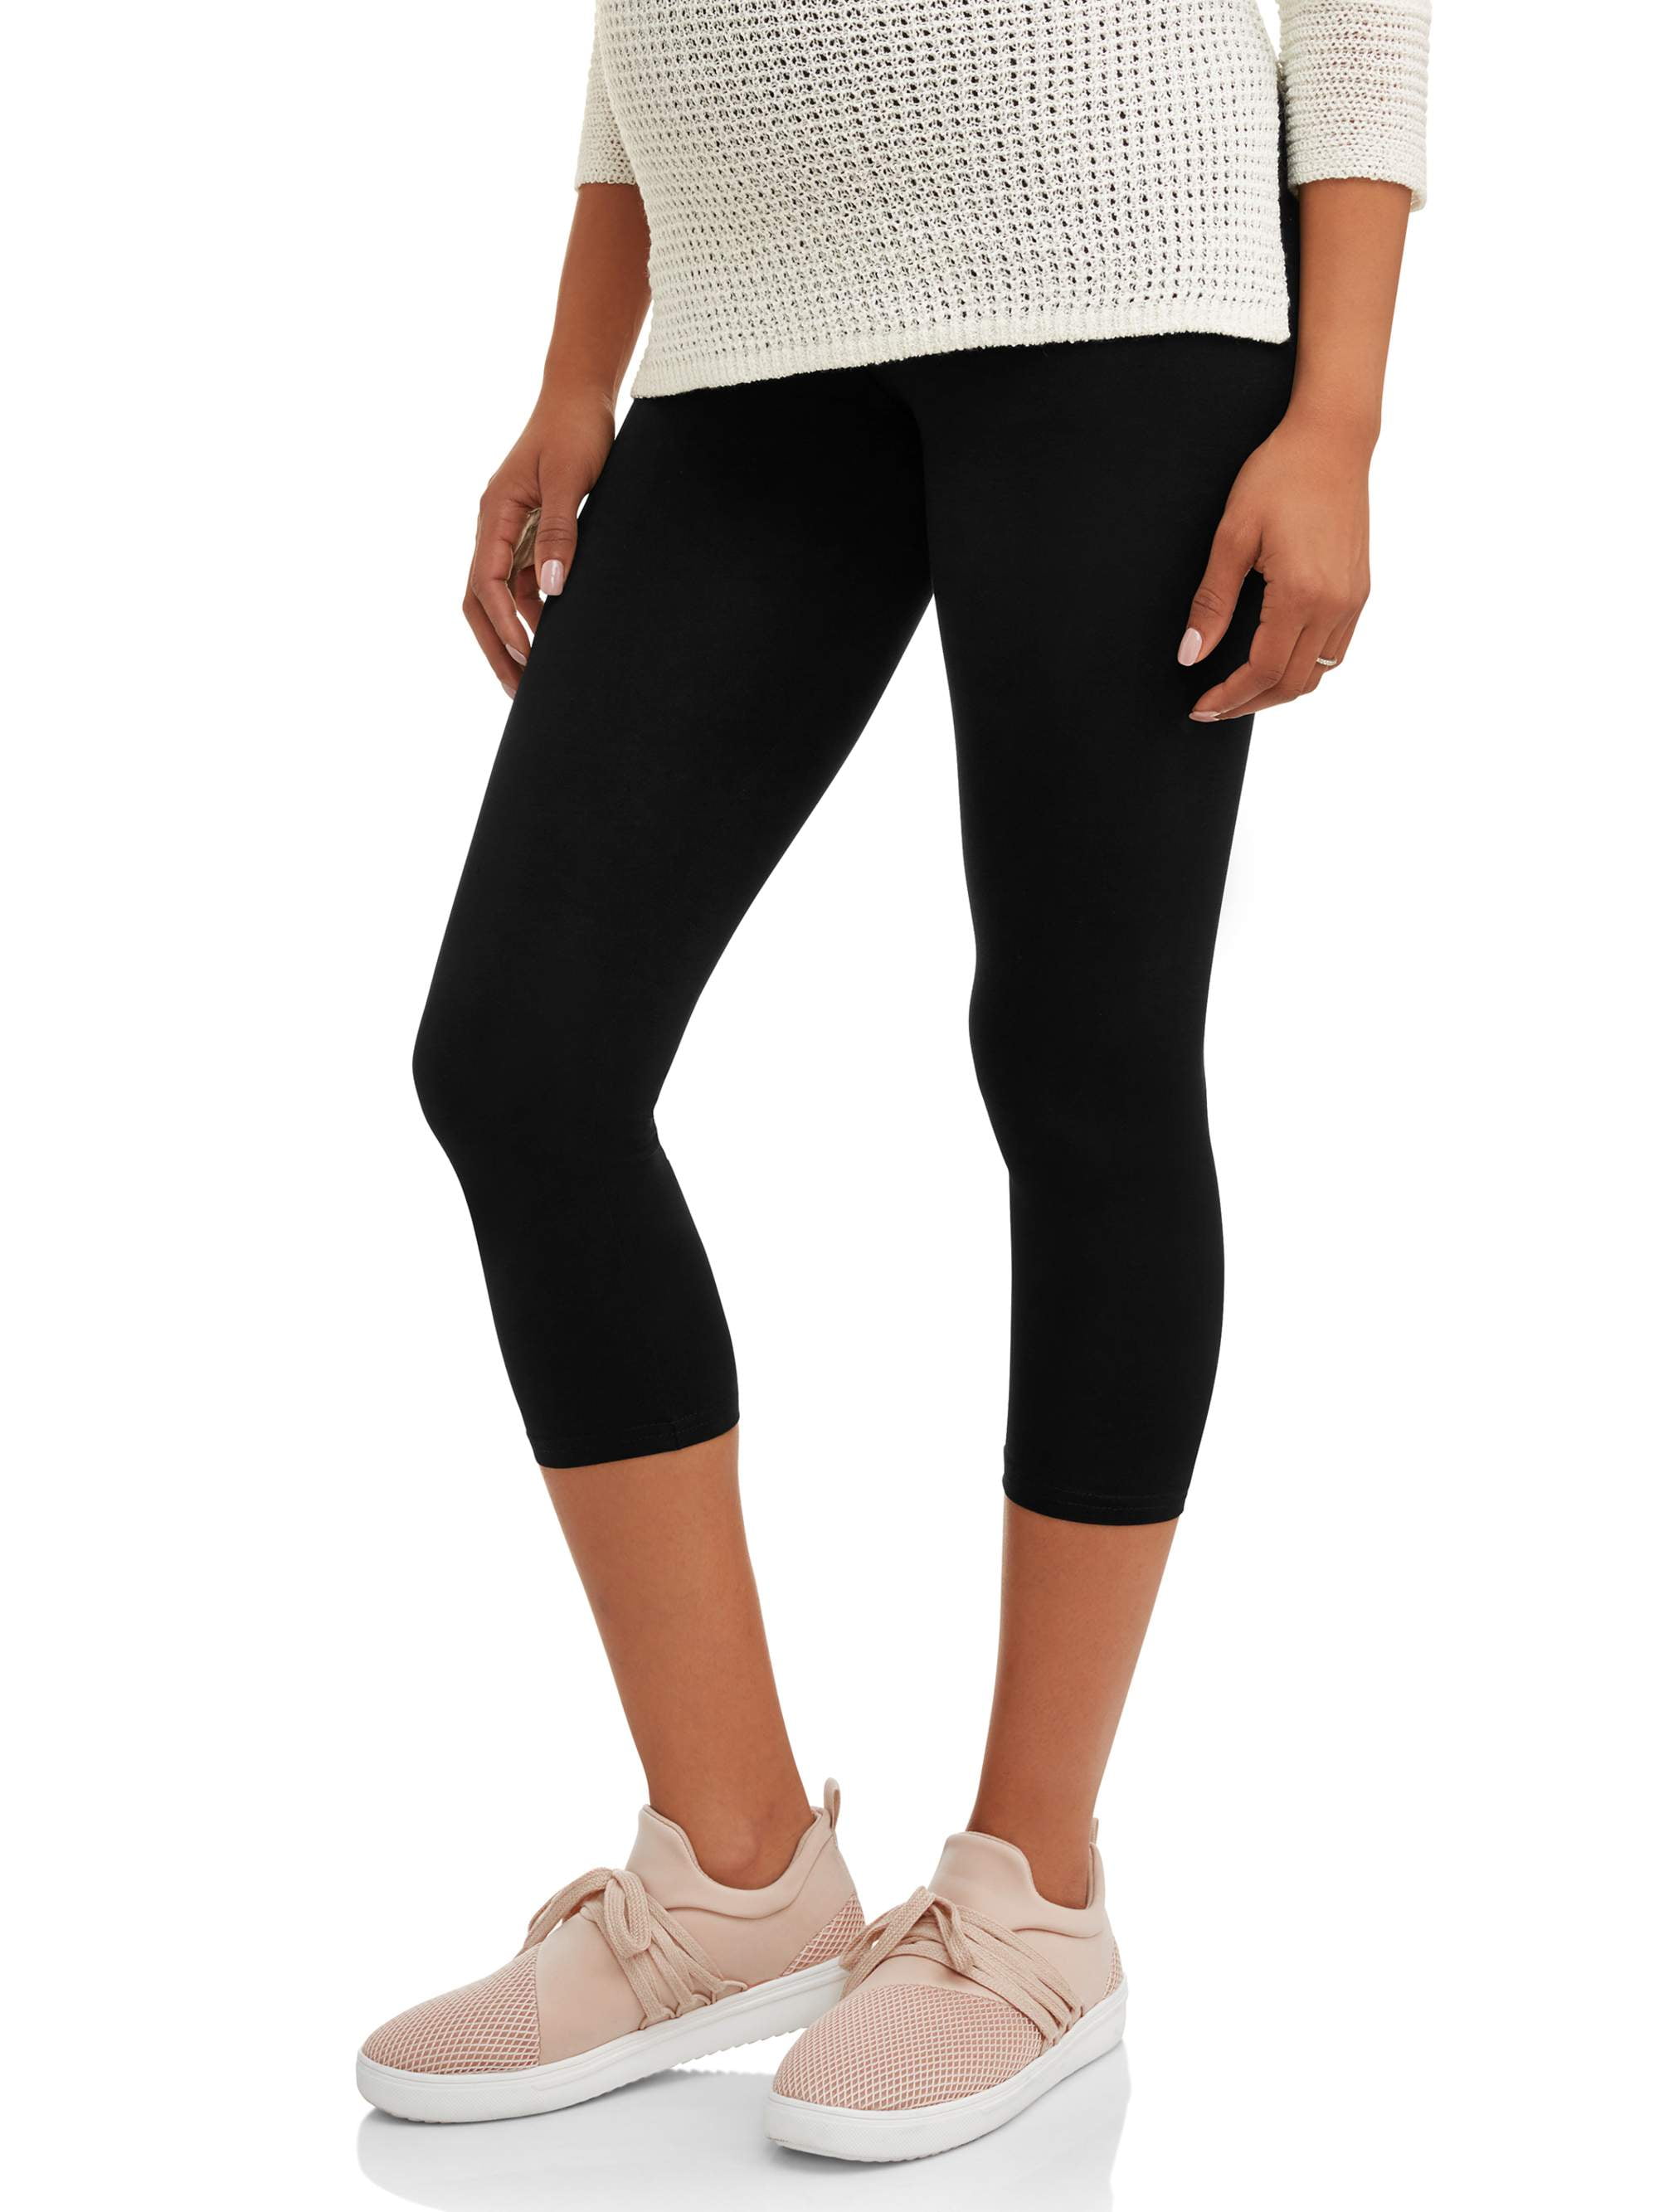 Maternity Oh! Mamma Legging Capris with Full Panel (Available in Plus Sizes)